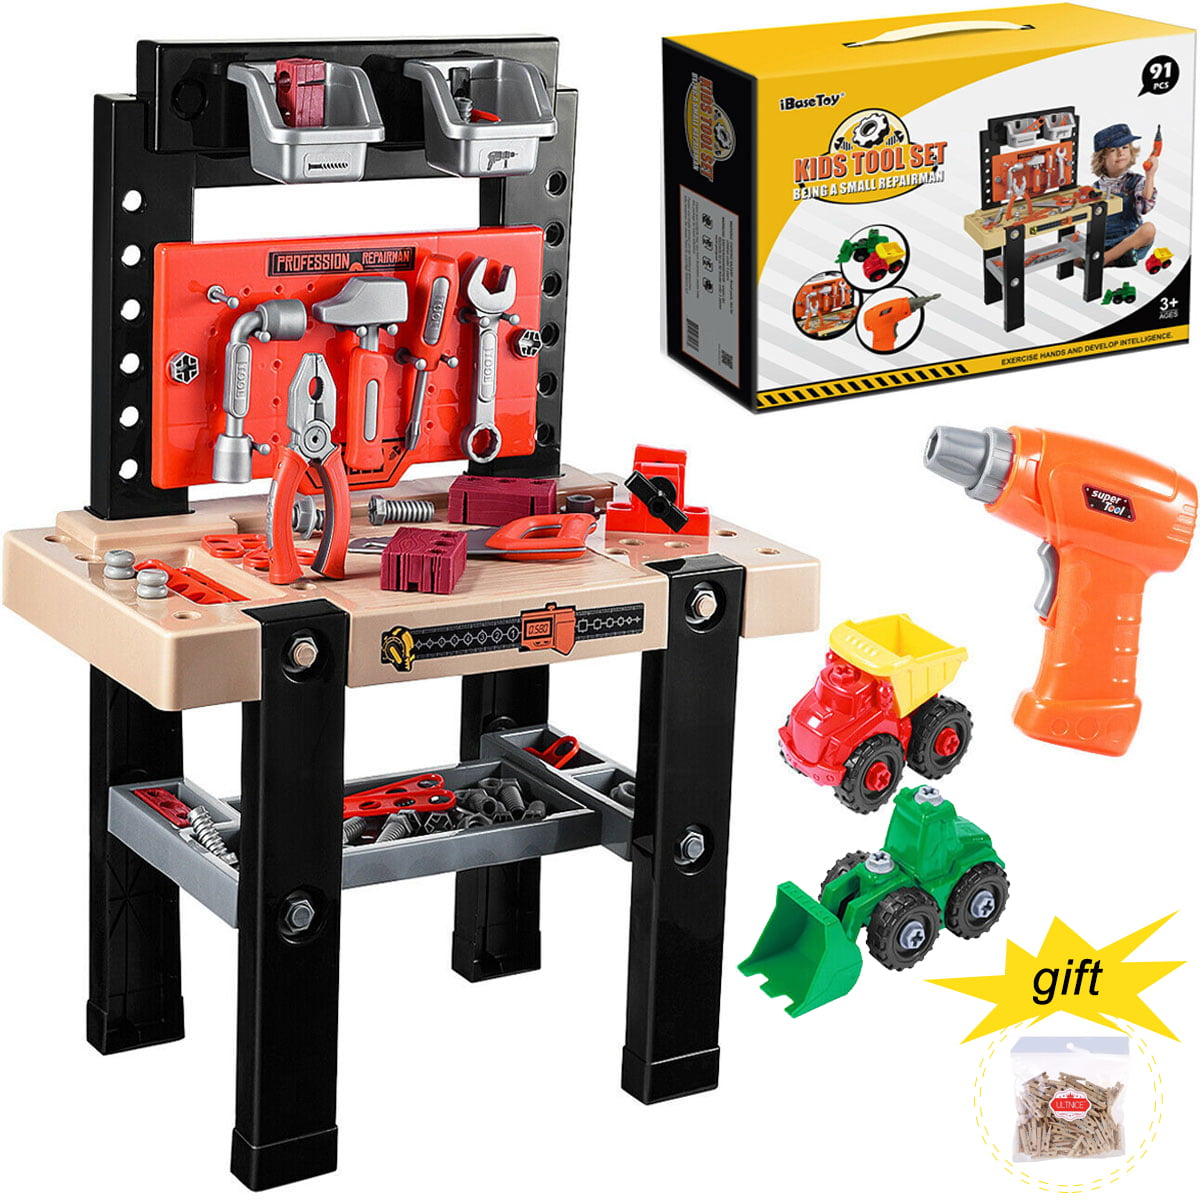 17PCS Kids Play Toy Tool Set Workbench Construction Workshop Toolbox Tools Gift 